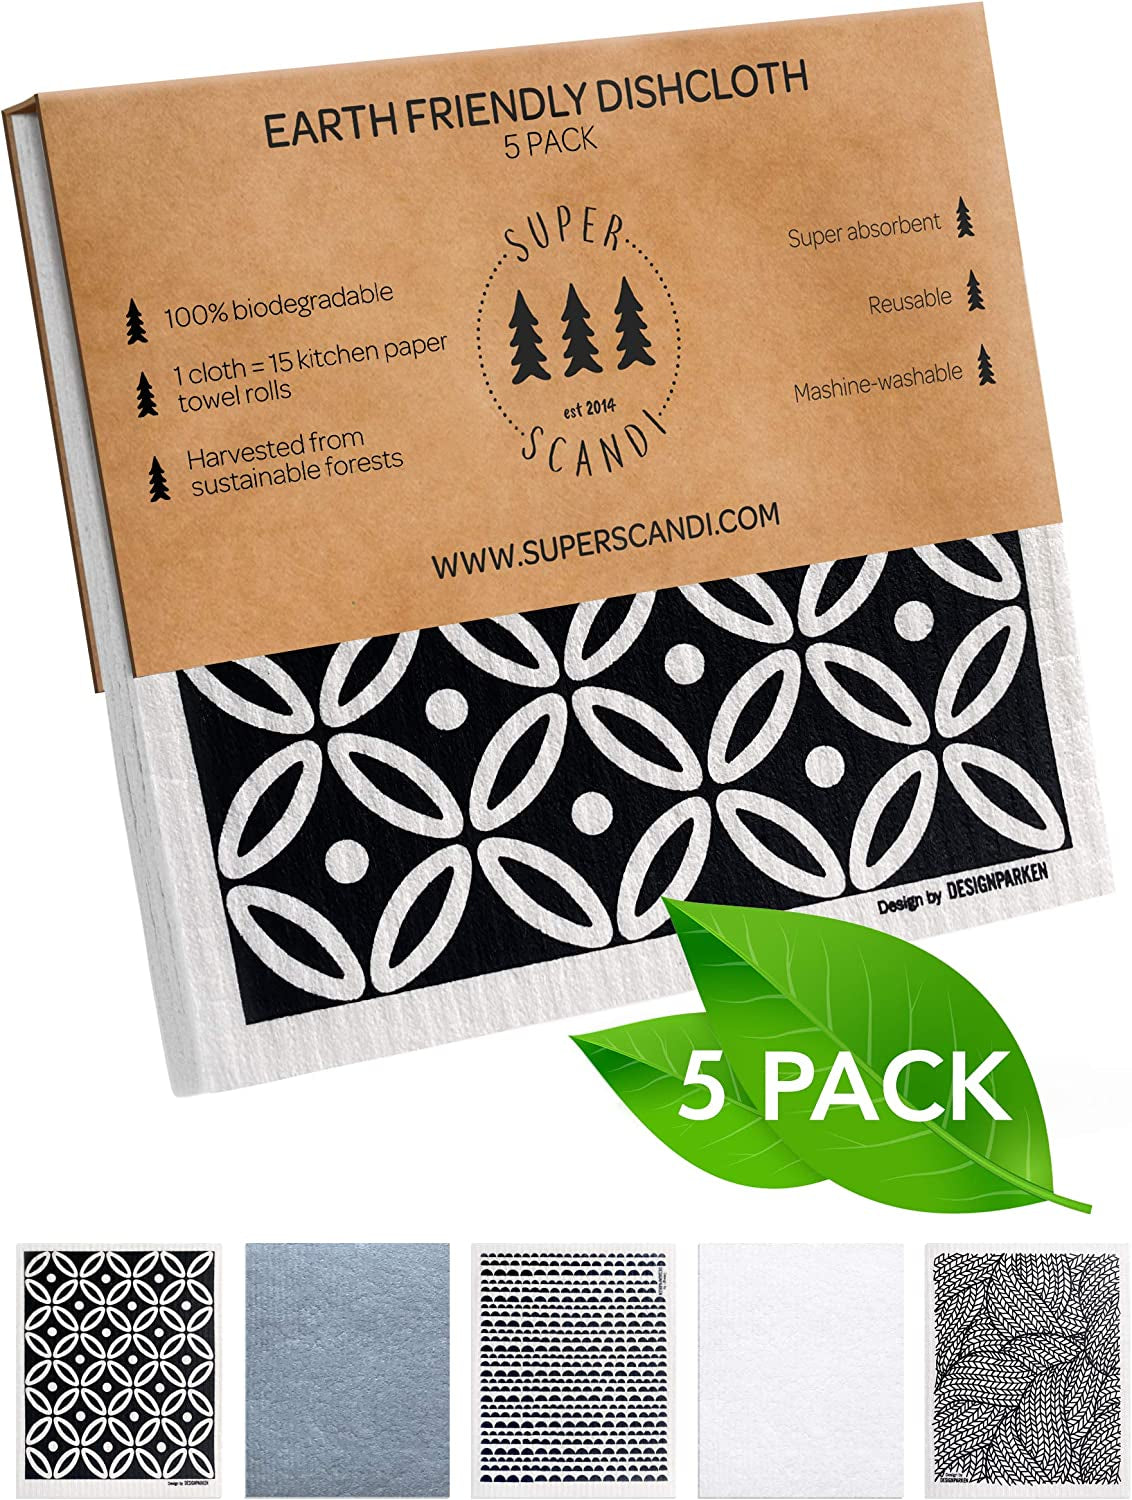 Swedish Dishcloths for Kitchen Eco Friendly Reusable Sustainable Biodegradable Cellulose Sponge Swedish Dish Cloths Dish Rags Washing Wipes Paper Towel Replacement (5 Pack Scandi Prints)